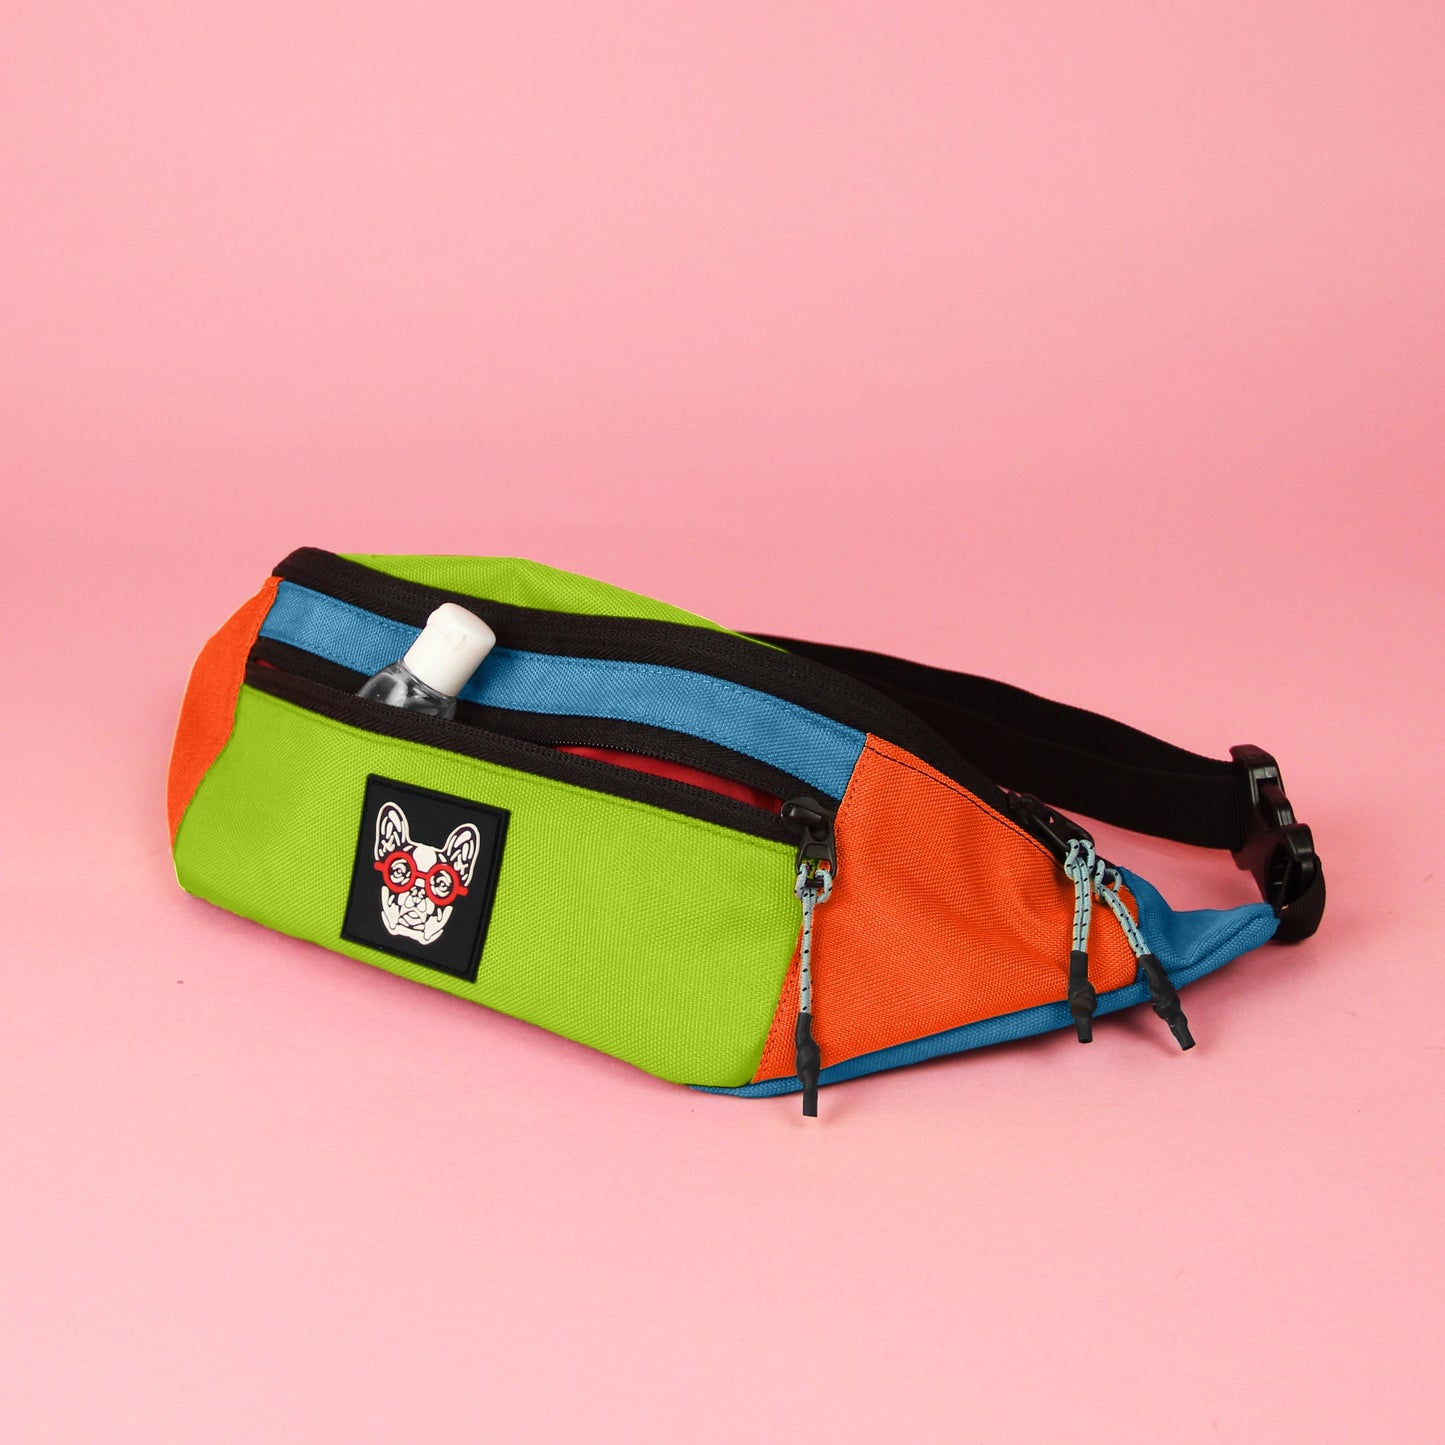 Sunny Lime Waist Bag Pouch with Smooth Coil Zippers - Madbrag